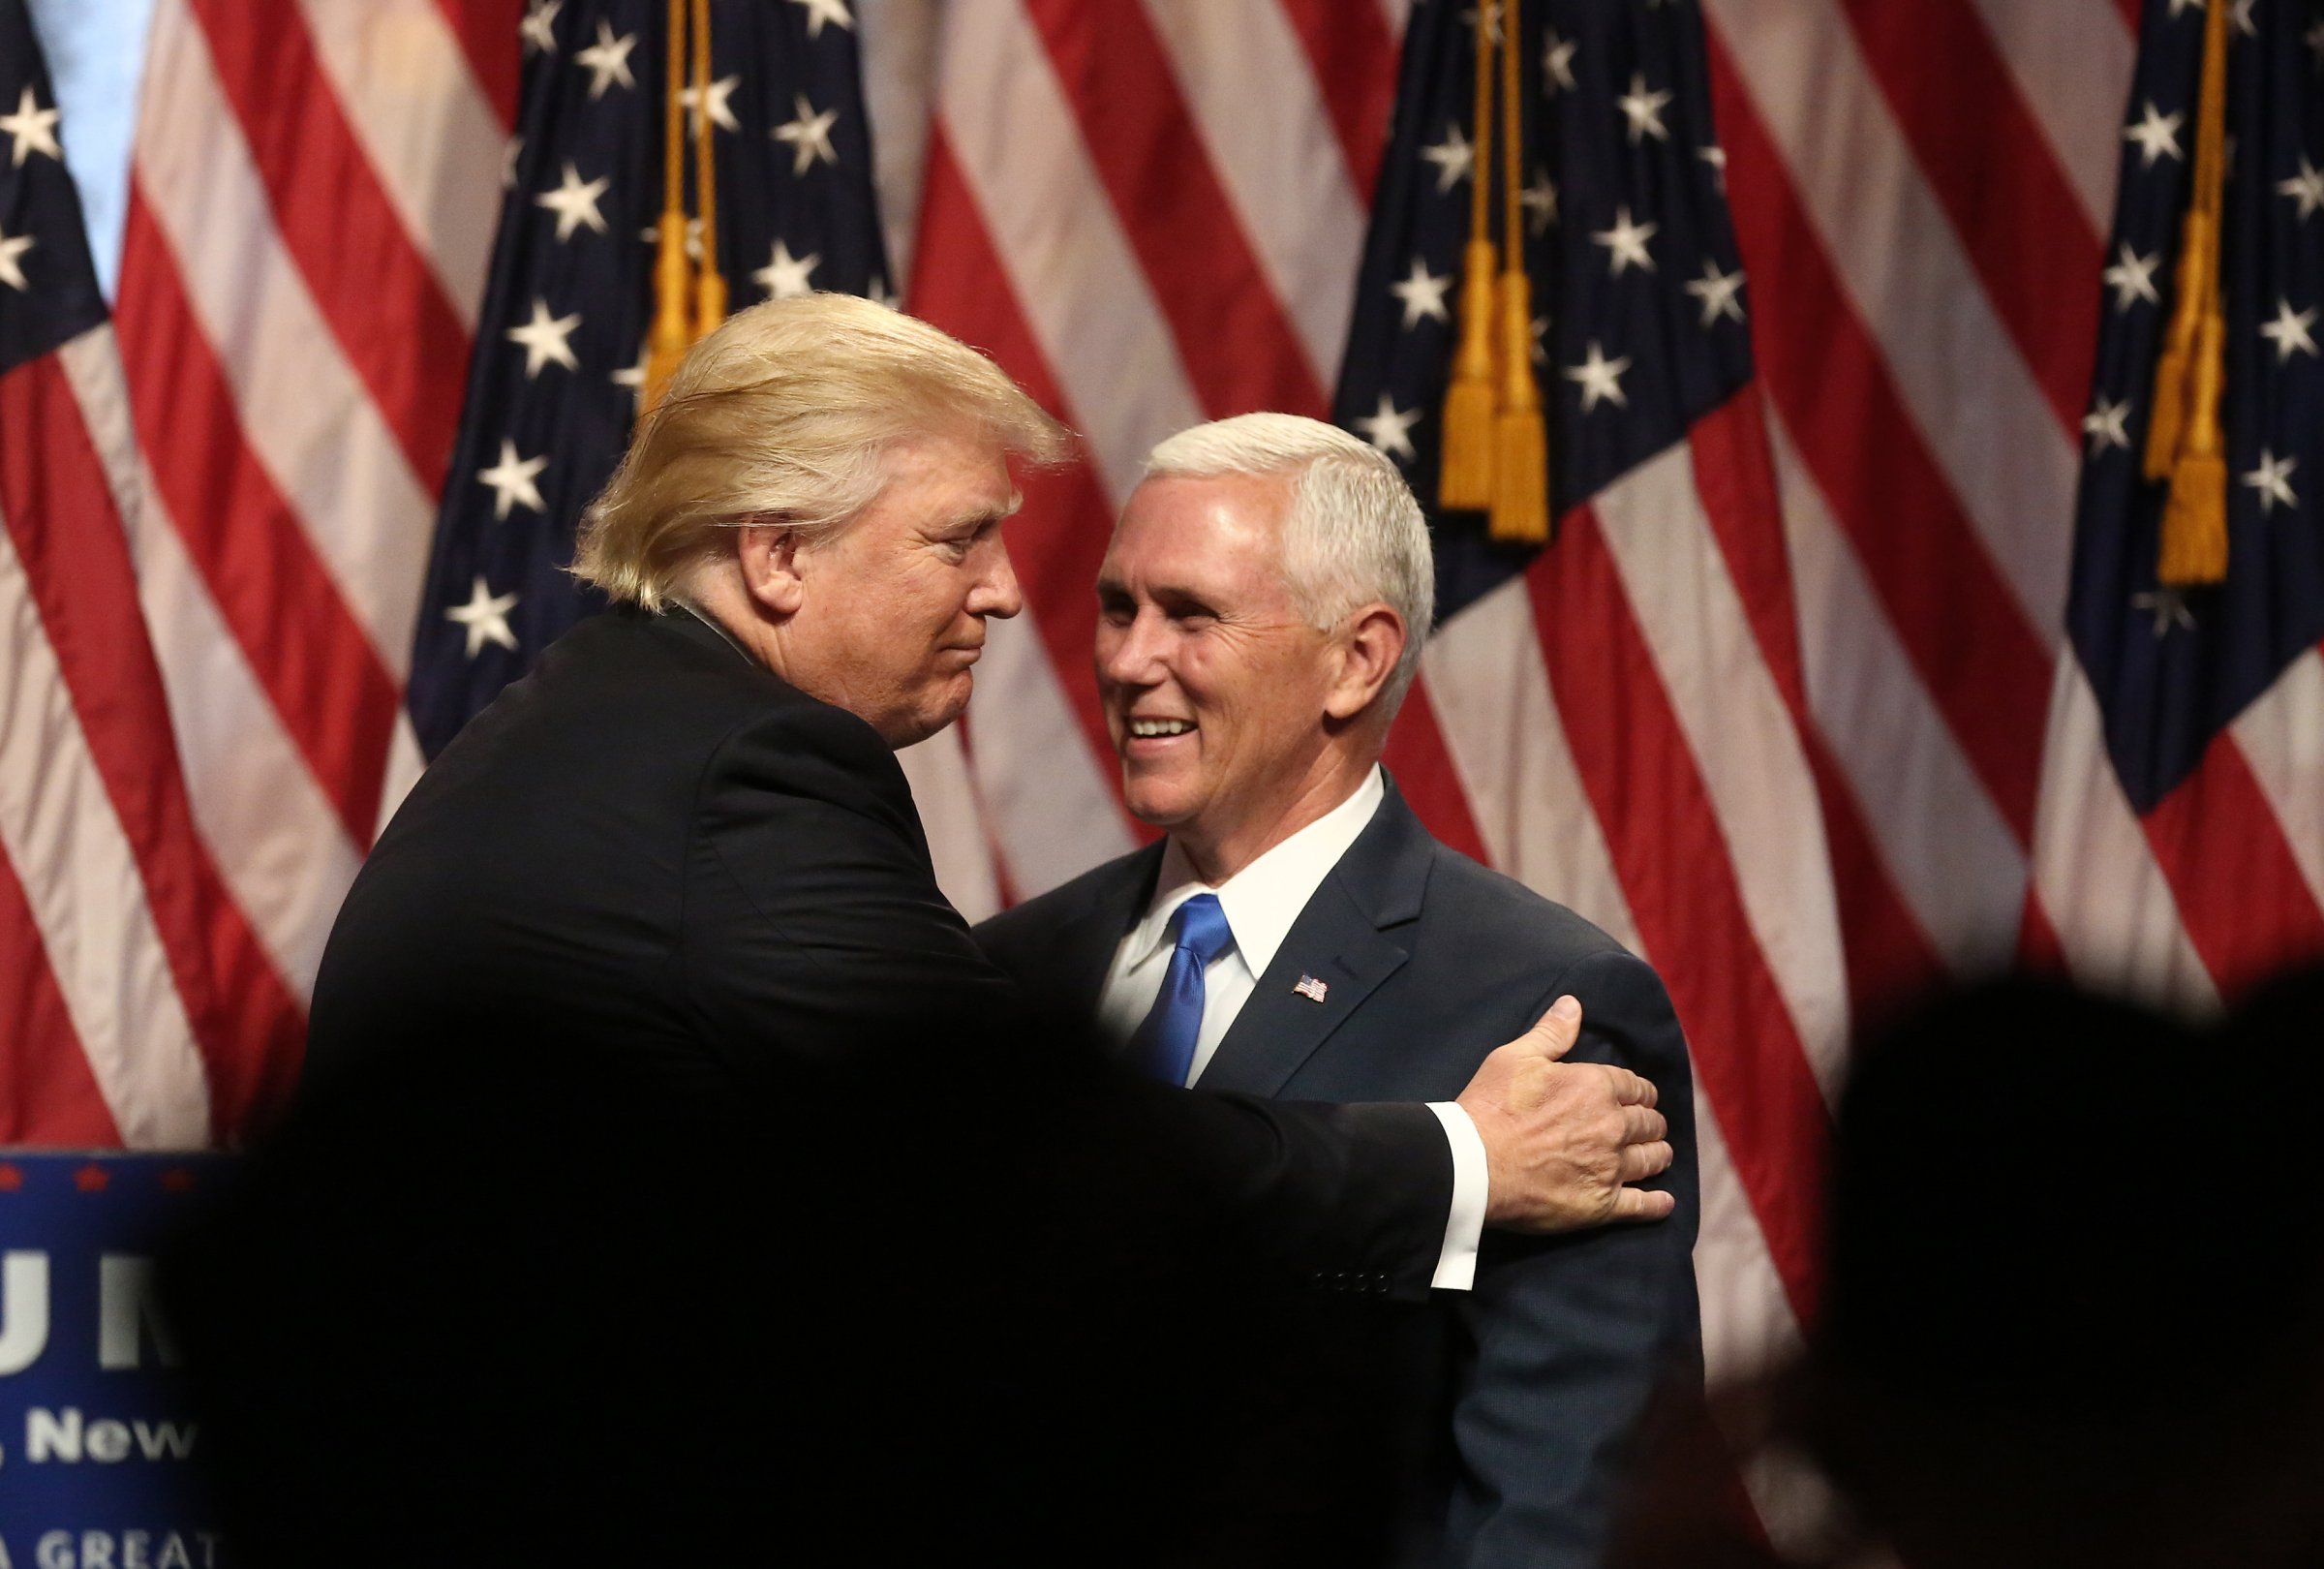 Donald Trump, presumptive Republican presidential nominee, greets Mike Pence, governor of Indiana and presumptive Republican vice presidential nominee, on stage during a campaign event in New York City, on July 16, 2016.